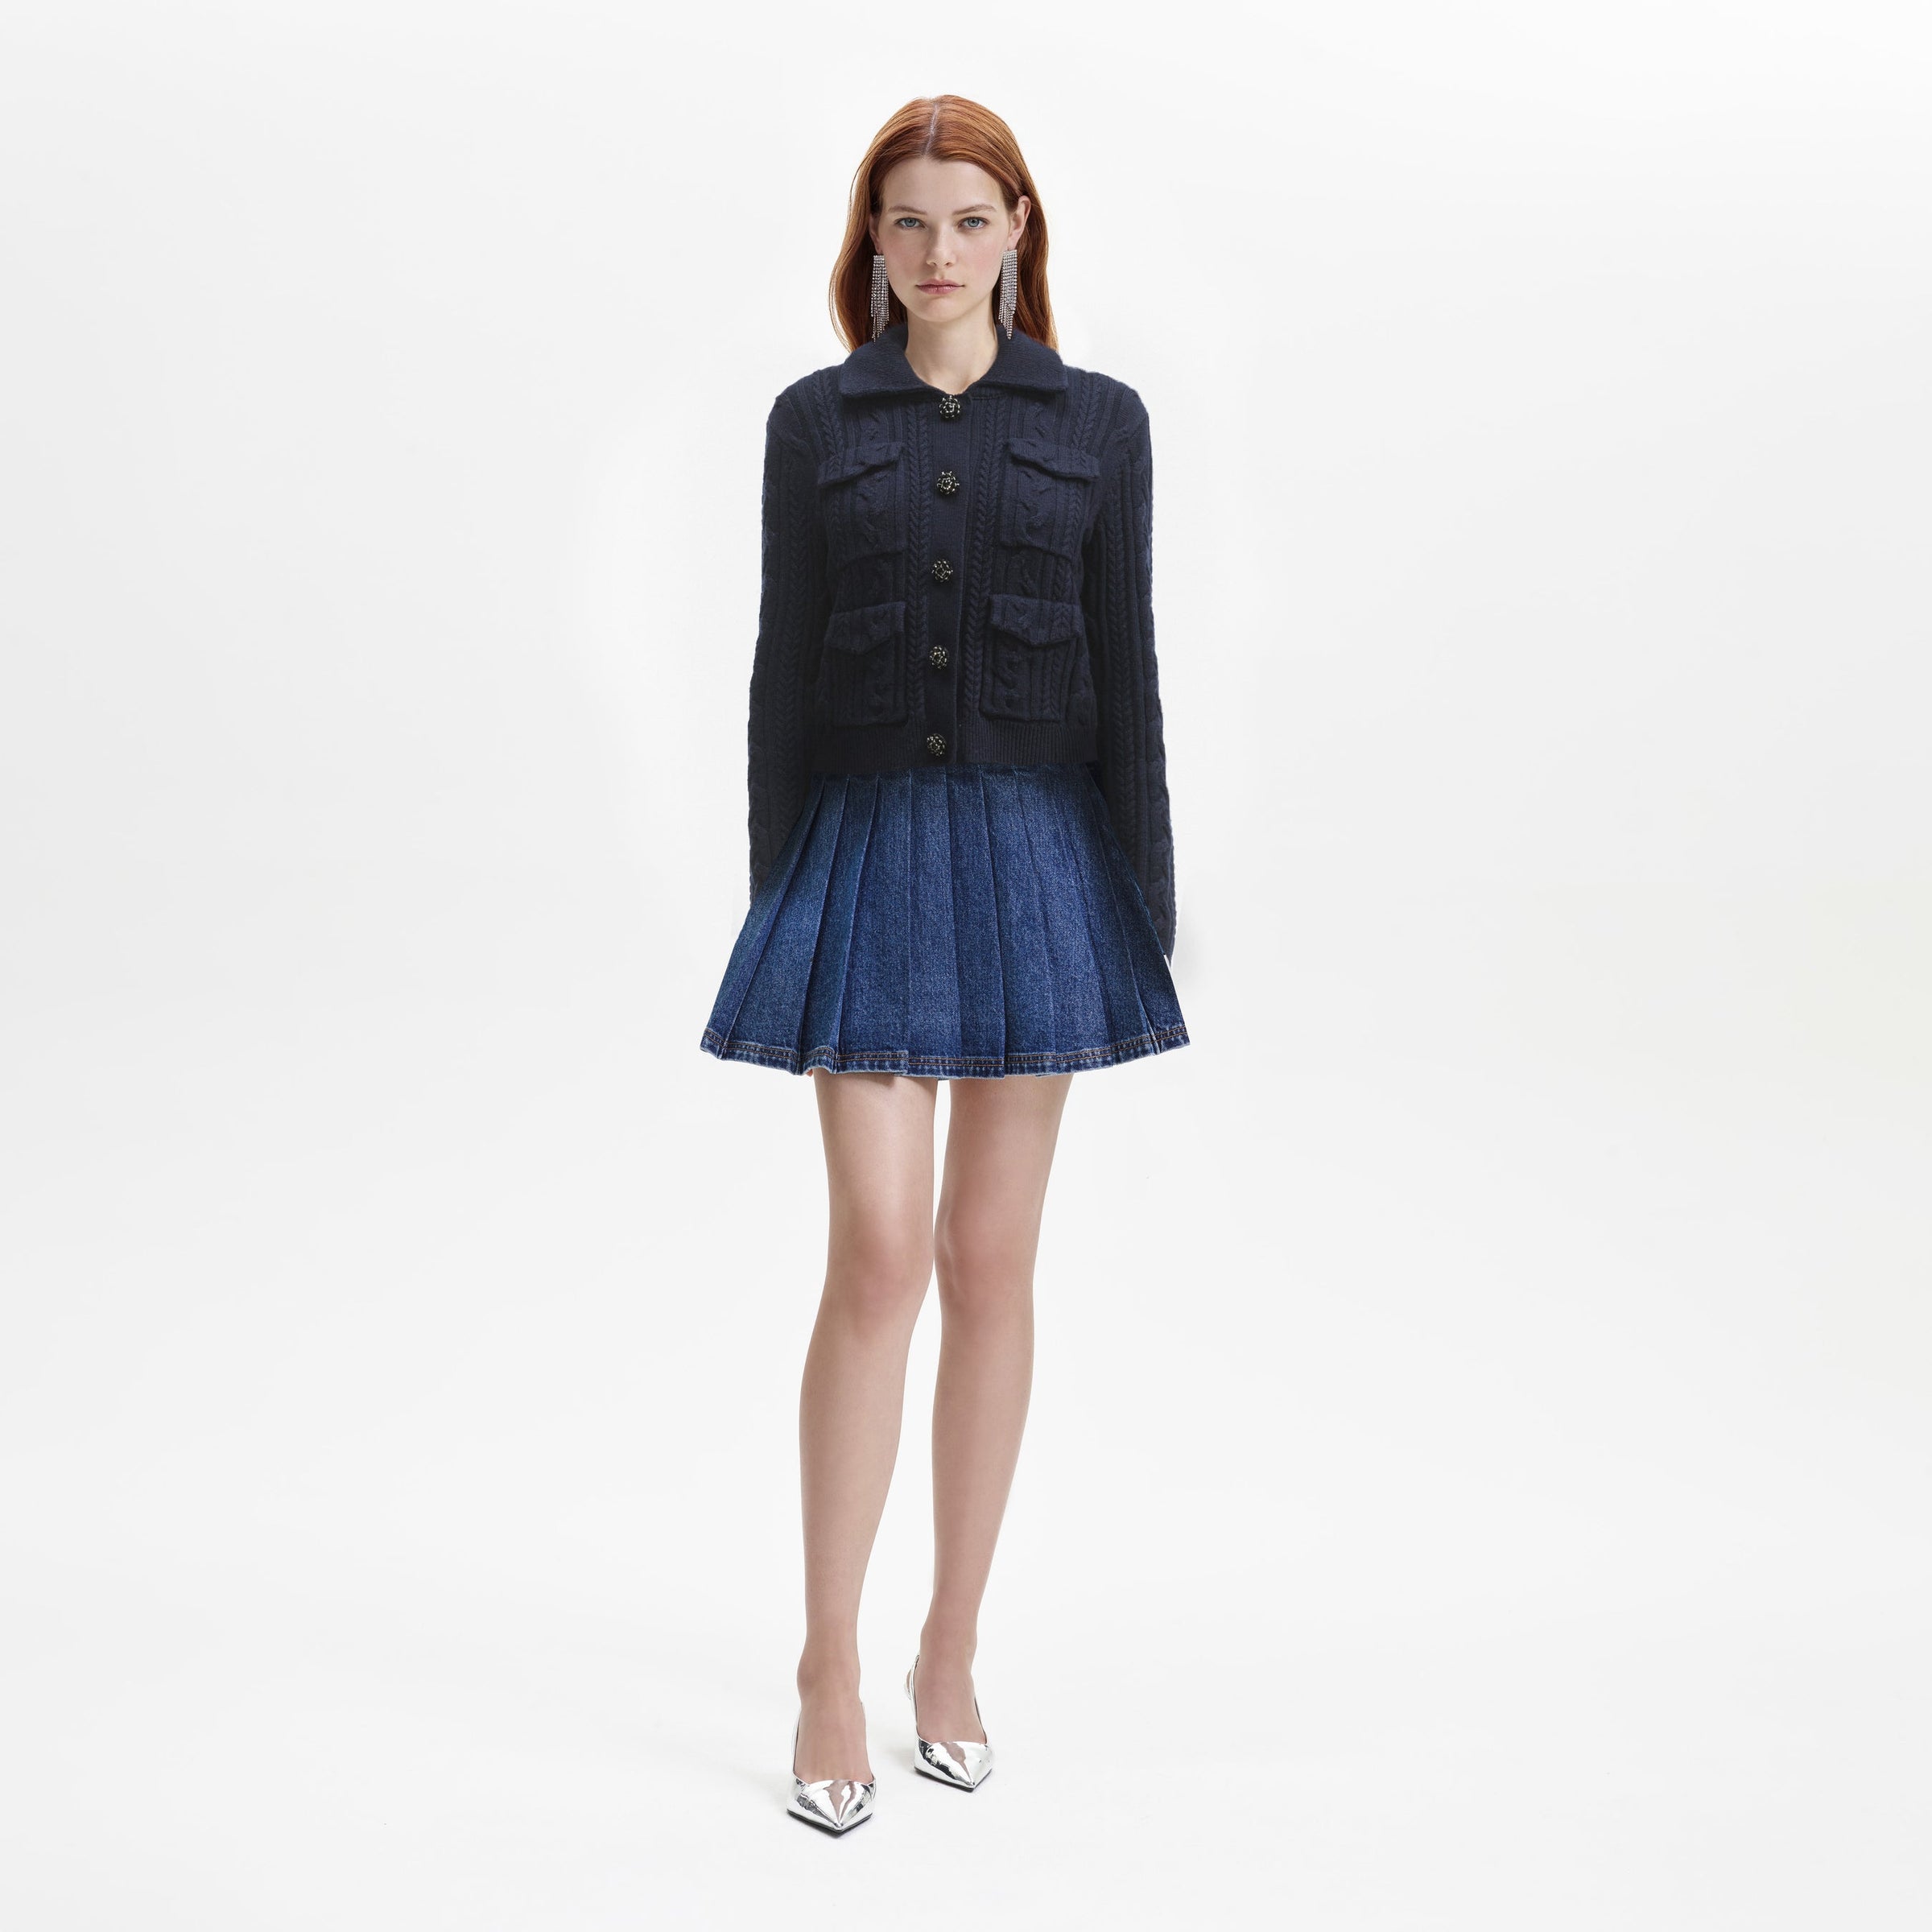 Navy collared cable knit cardigane with collar four patch pockets and decorative diamante and beaded buttons